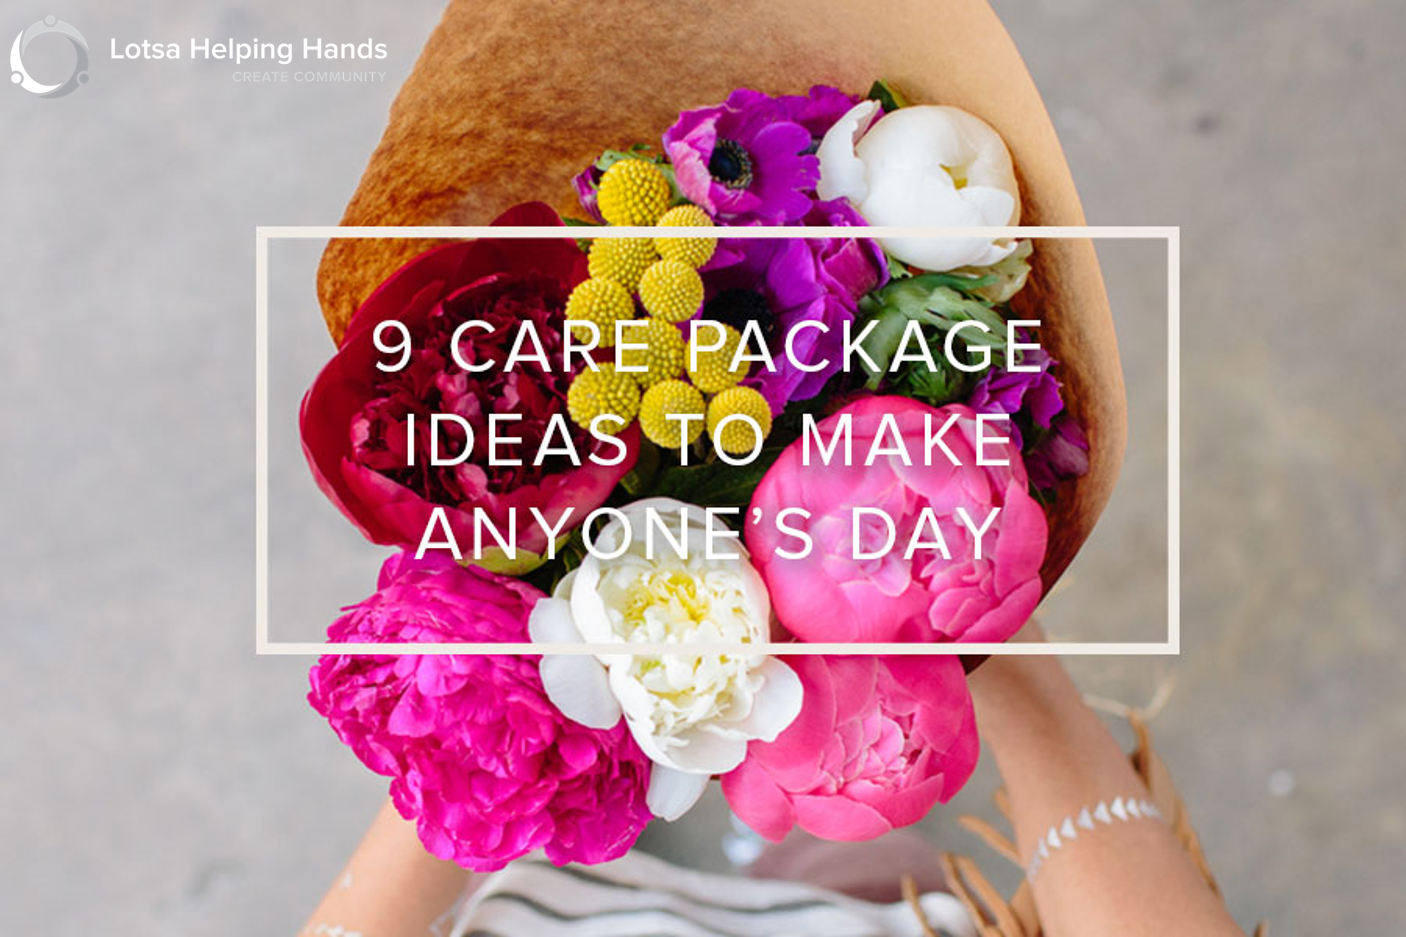 9 care package ideas to make anyone's day